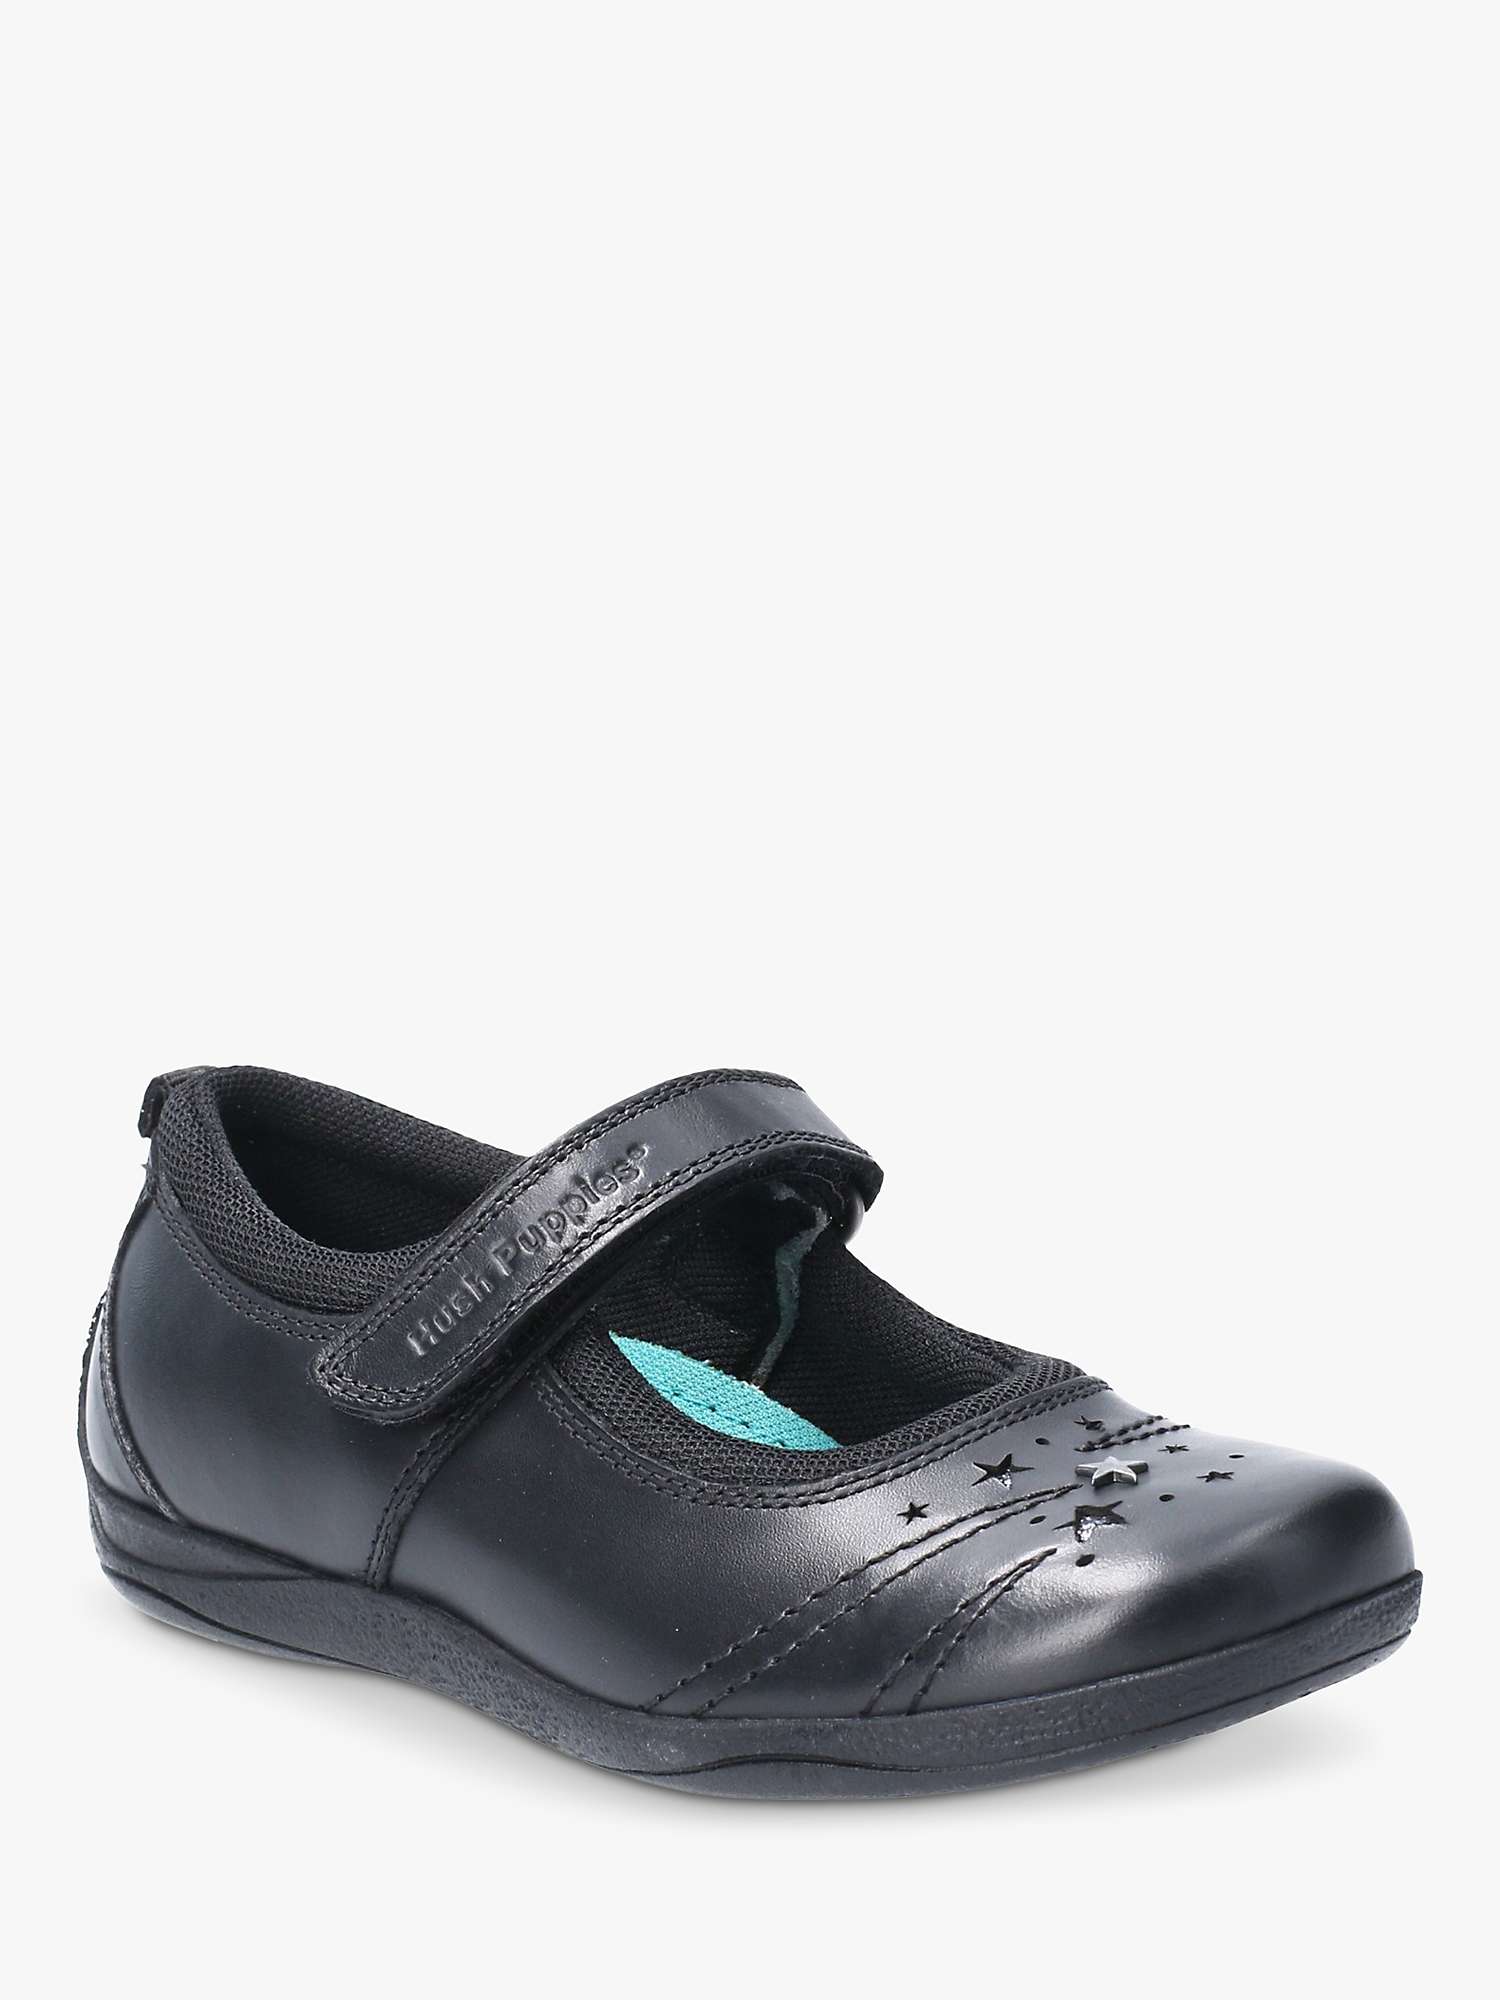 Buy Hush Puppies Kids' Amber Junior Leather Mary Jane Shoes, Black Online at johnlewis.com